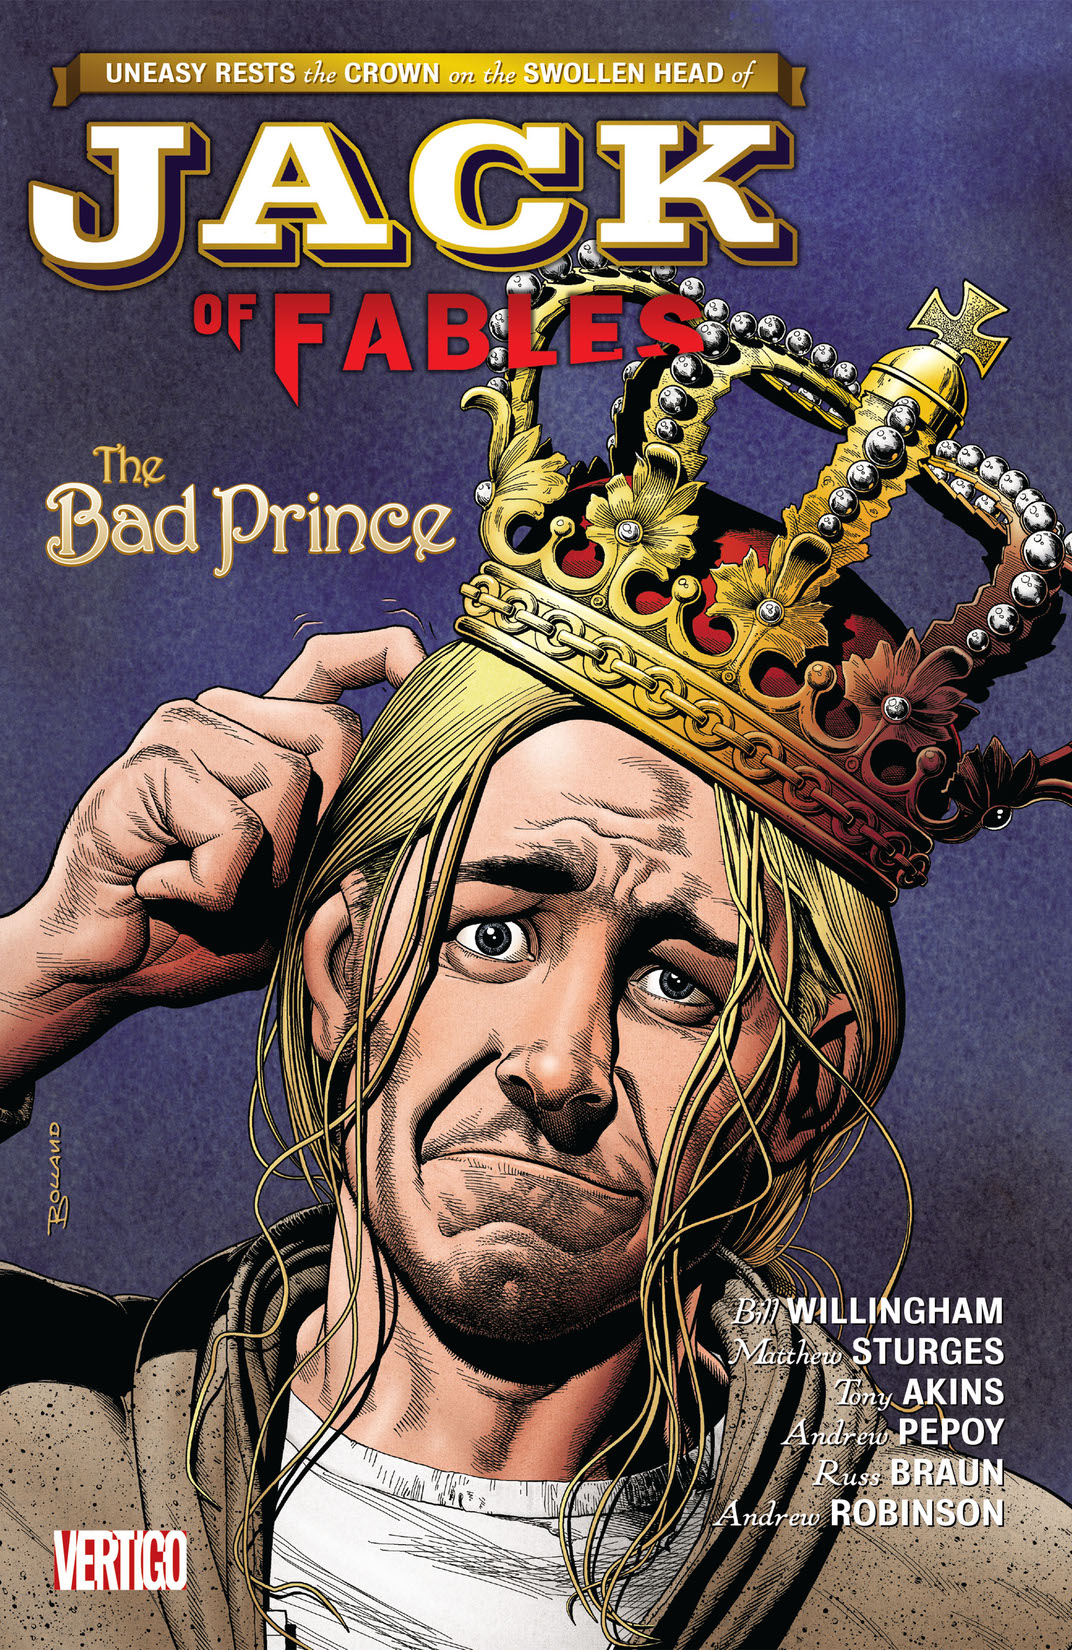 Jack of Fables Vol. 3 The Bad Prince preview images